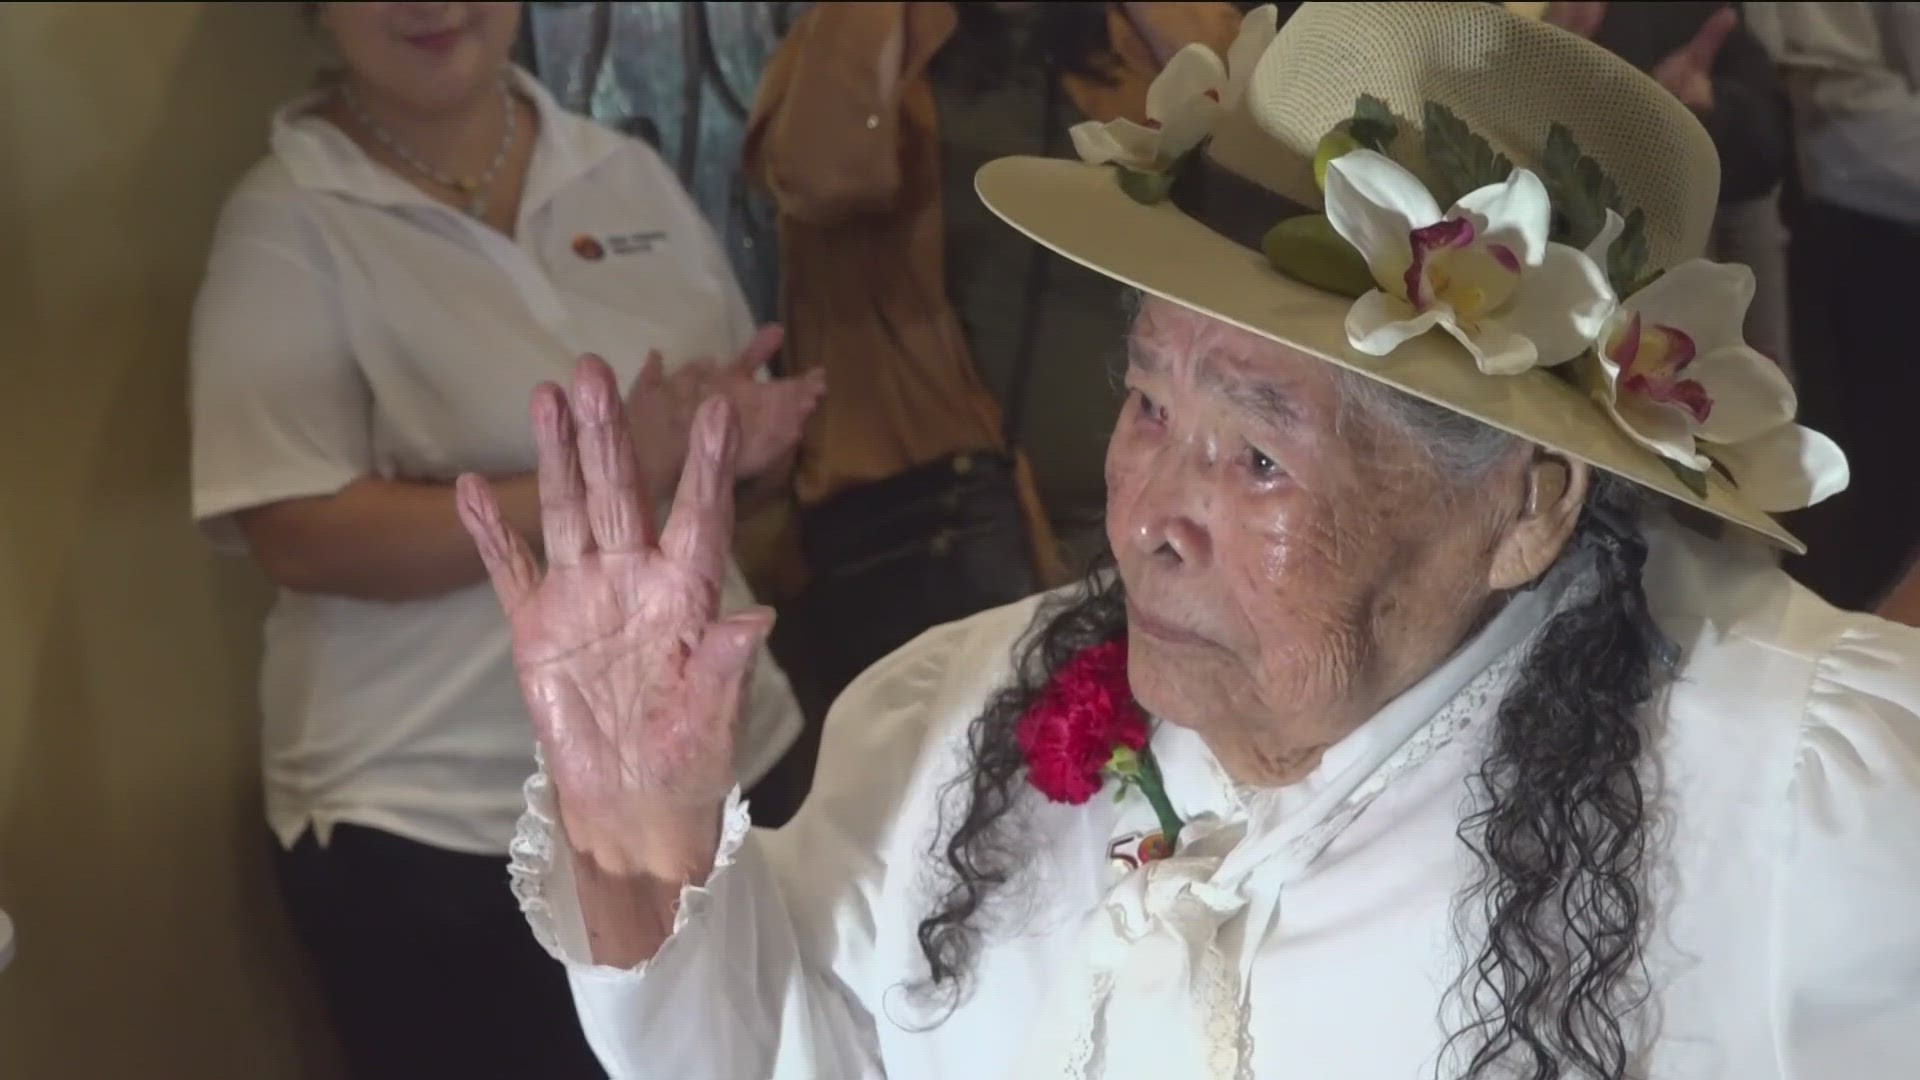 South Bay celebrated Carmen Martinez’s 100th birthday, she helped San Ysidro Health grow from its start in a casita back in 1969.